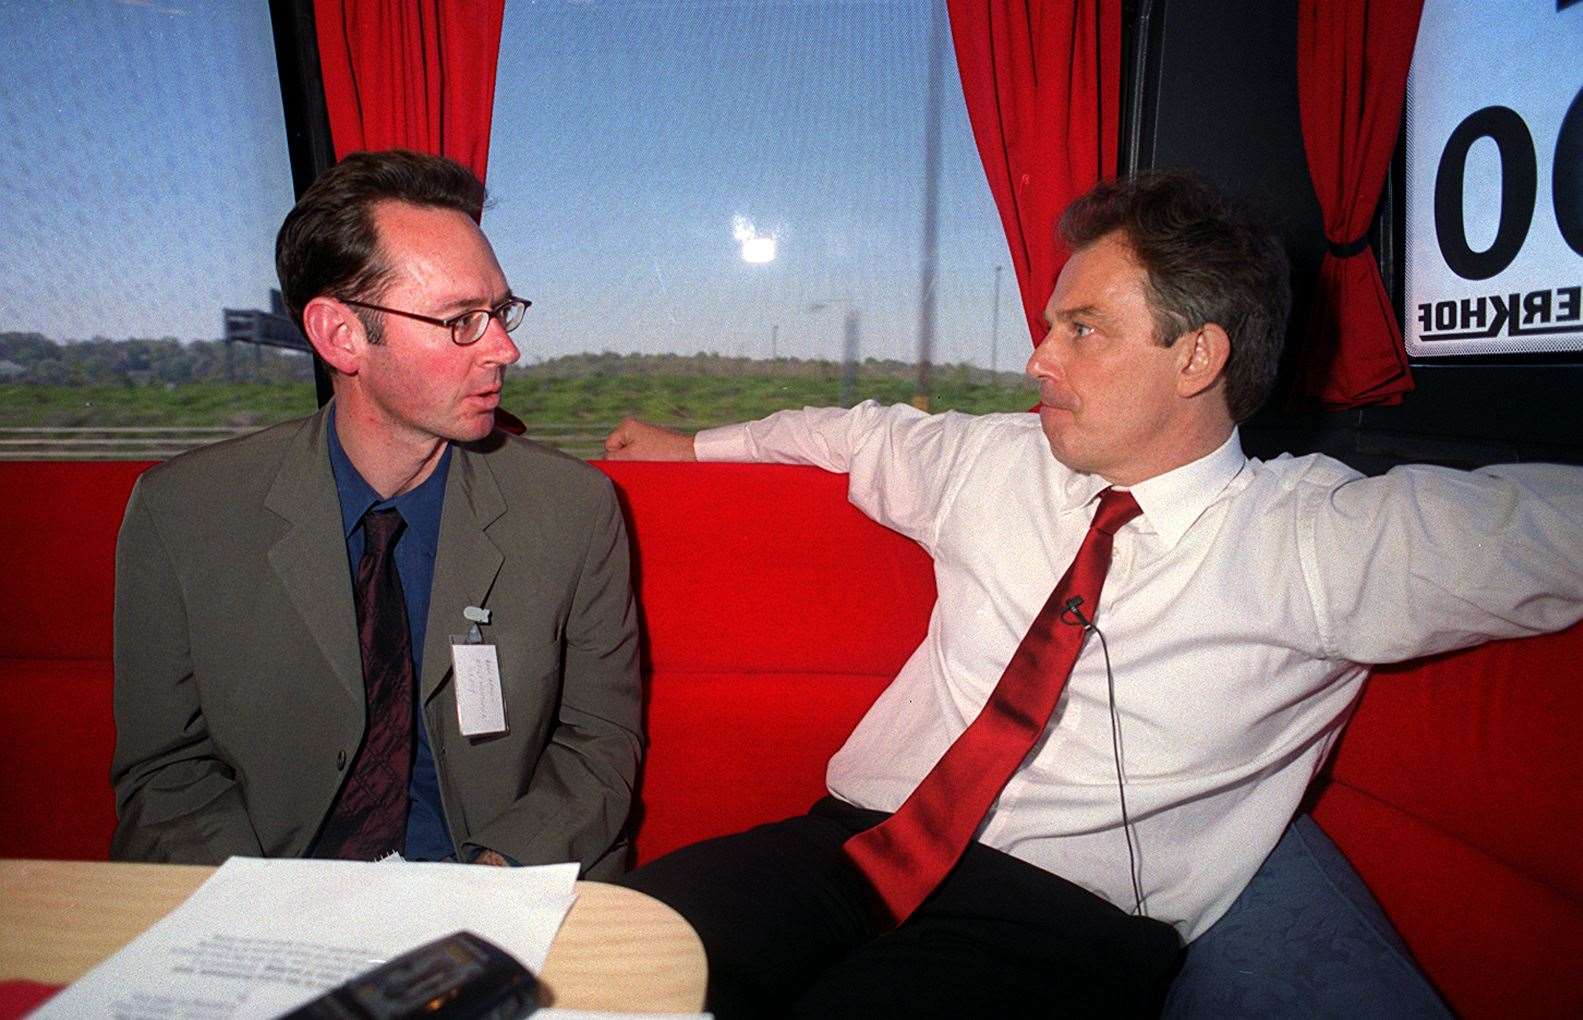 An Exclusive interview for KM's Paul Francis with Tony Blair.